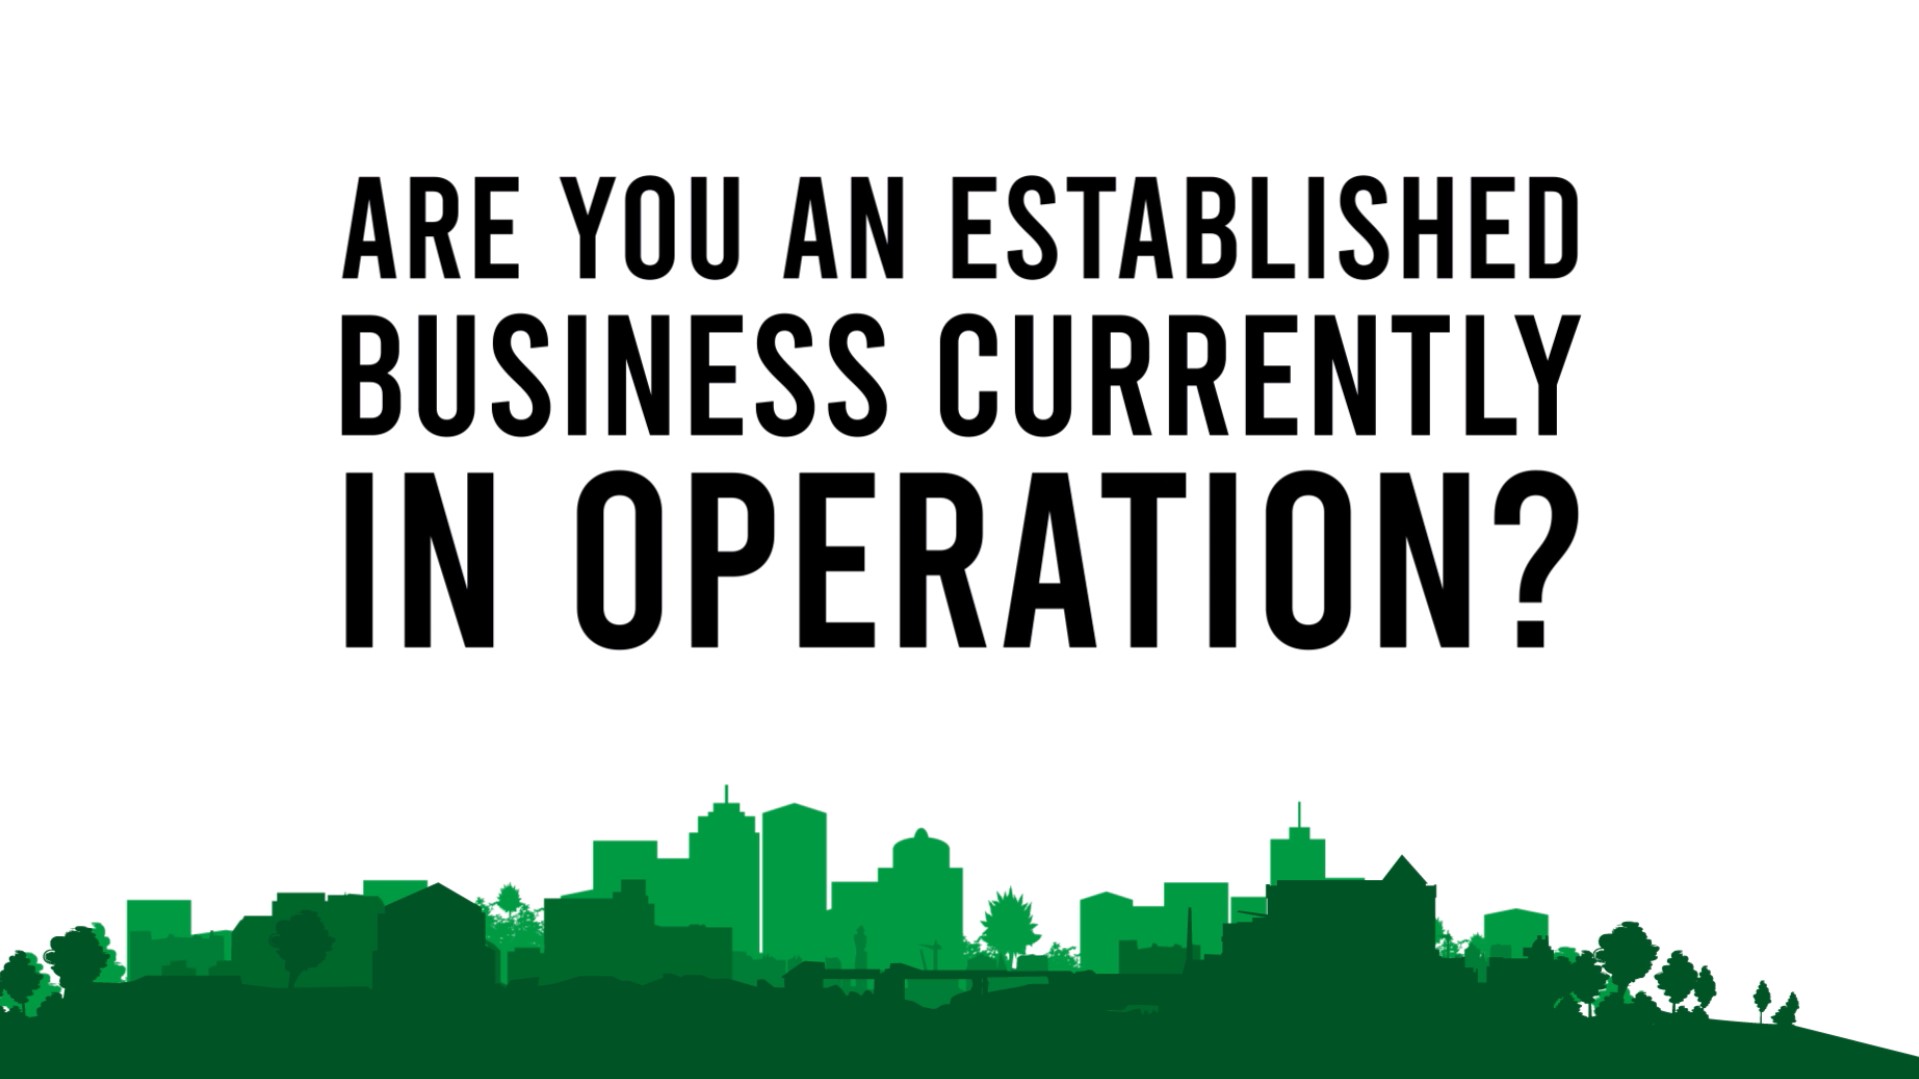 Are you an established business currently in operation?